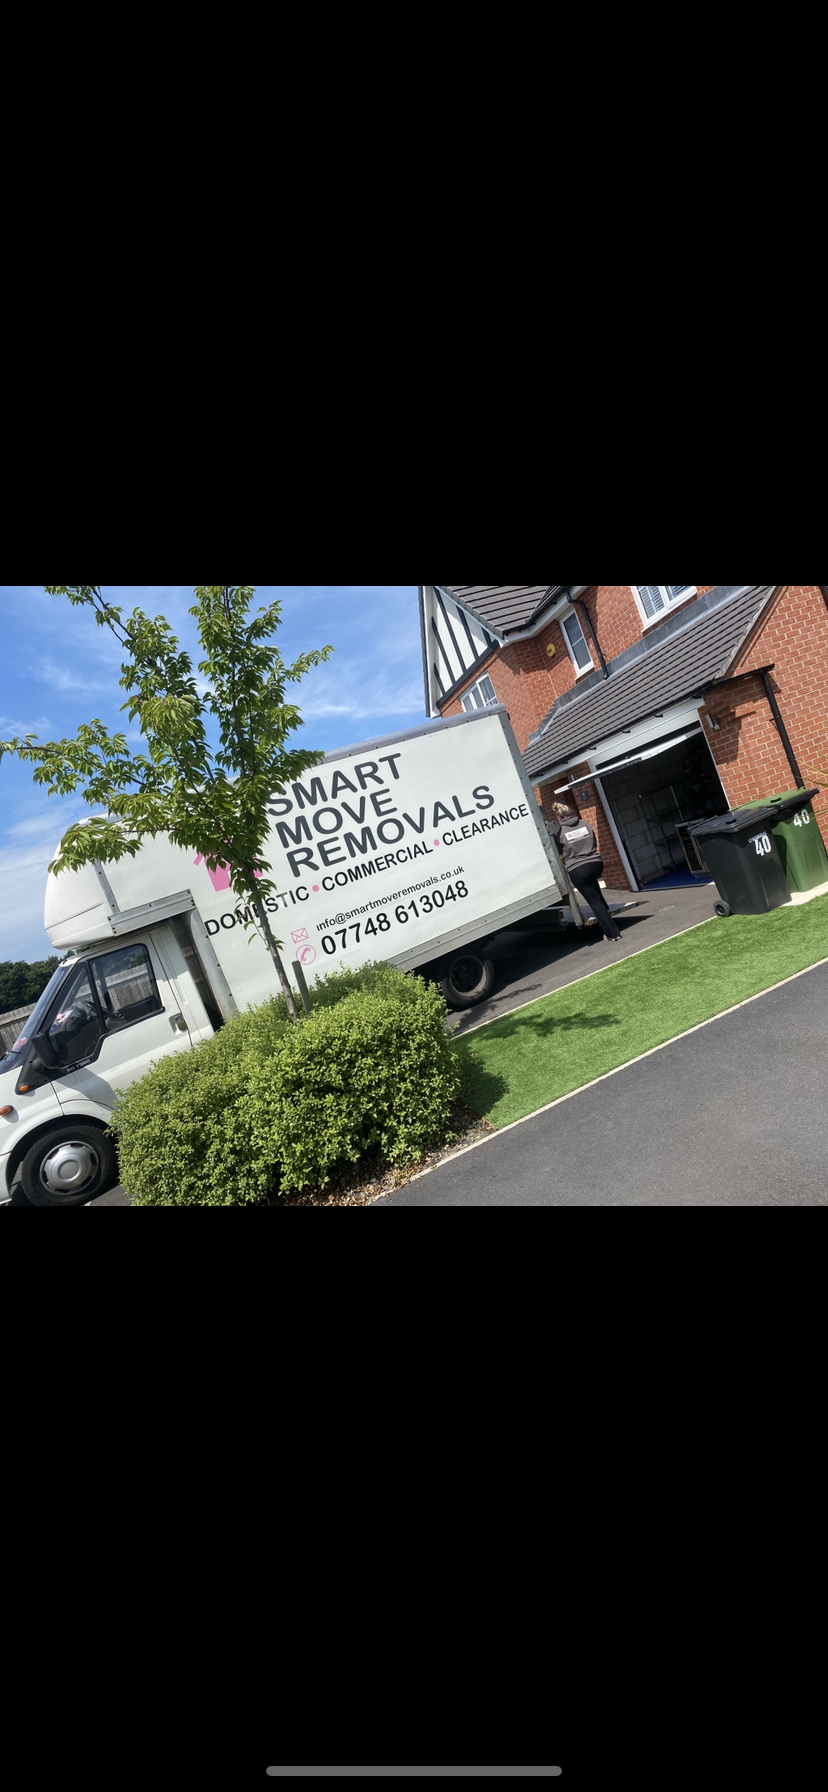 Smart move removals limited